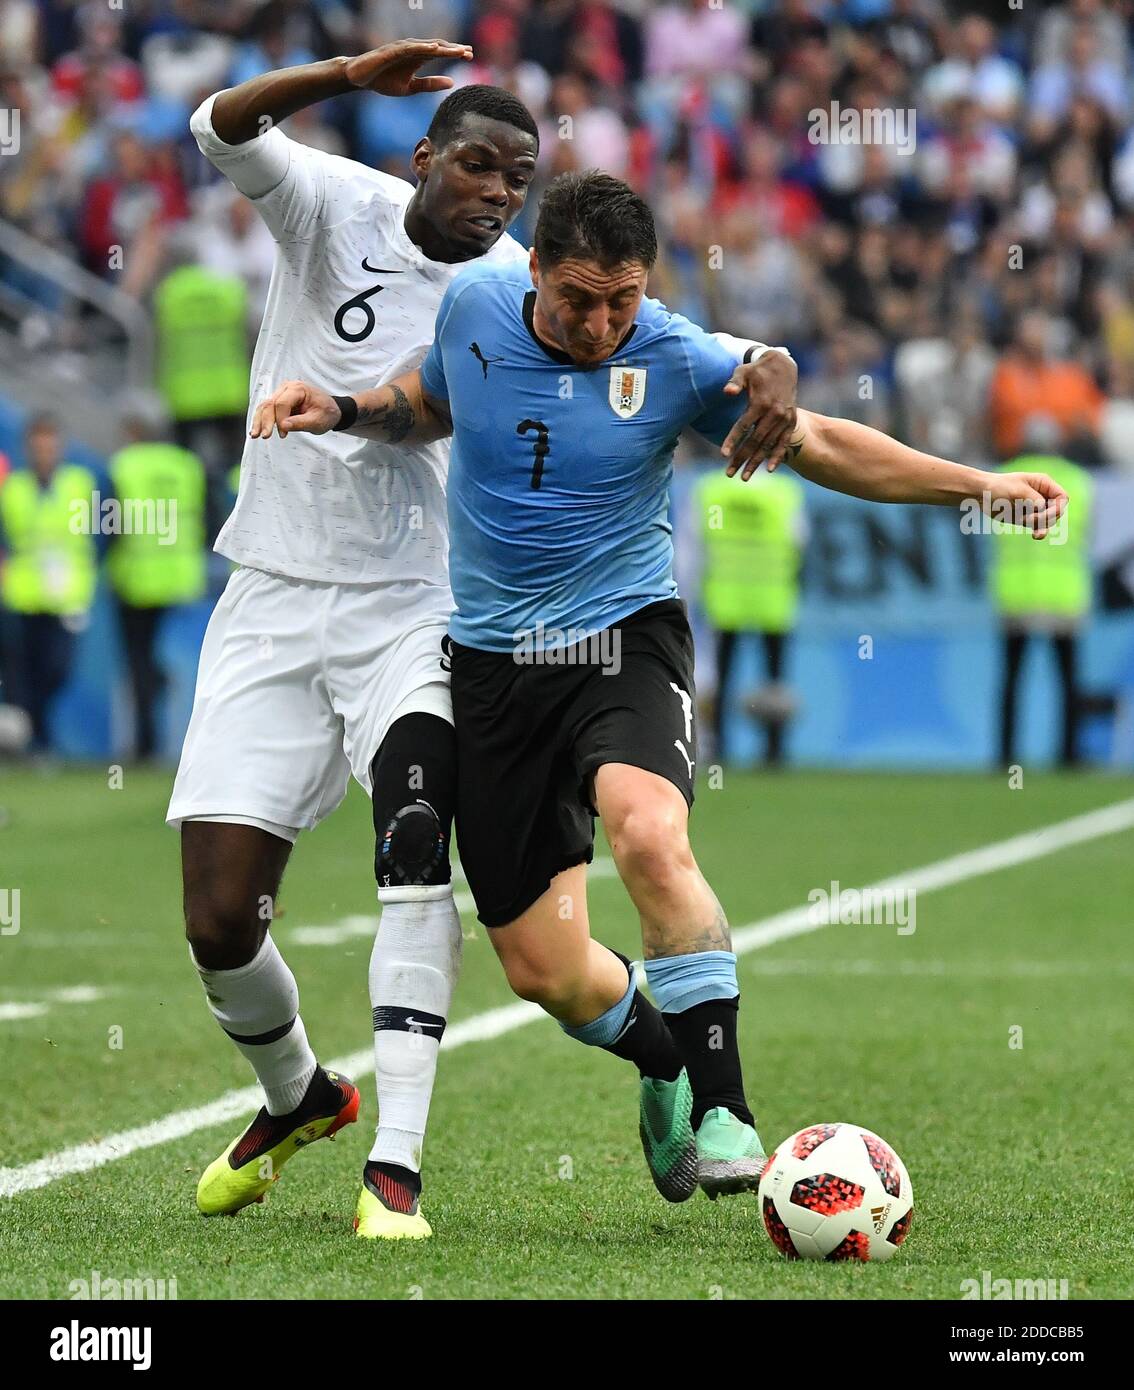 France's Paul Pogba and Uruguay's Cristian Rodriguez during the FIFA World Cup 2018 Round of 8 France v Uruguay match at the Nizhny Novgorod Stadium Russia, on July 6, 2018. France won 2-0. Photo by Christian Liewig/ABACAPRESS.COM Stock Photo